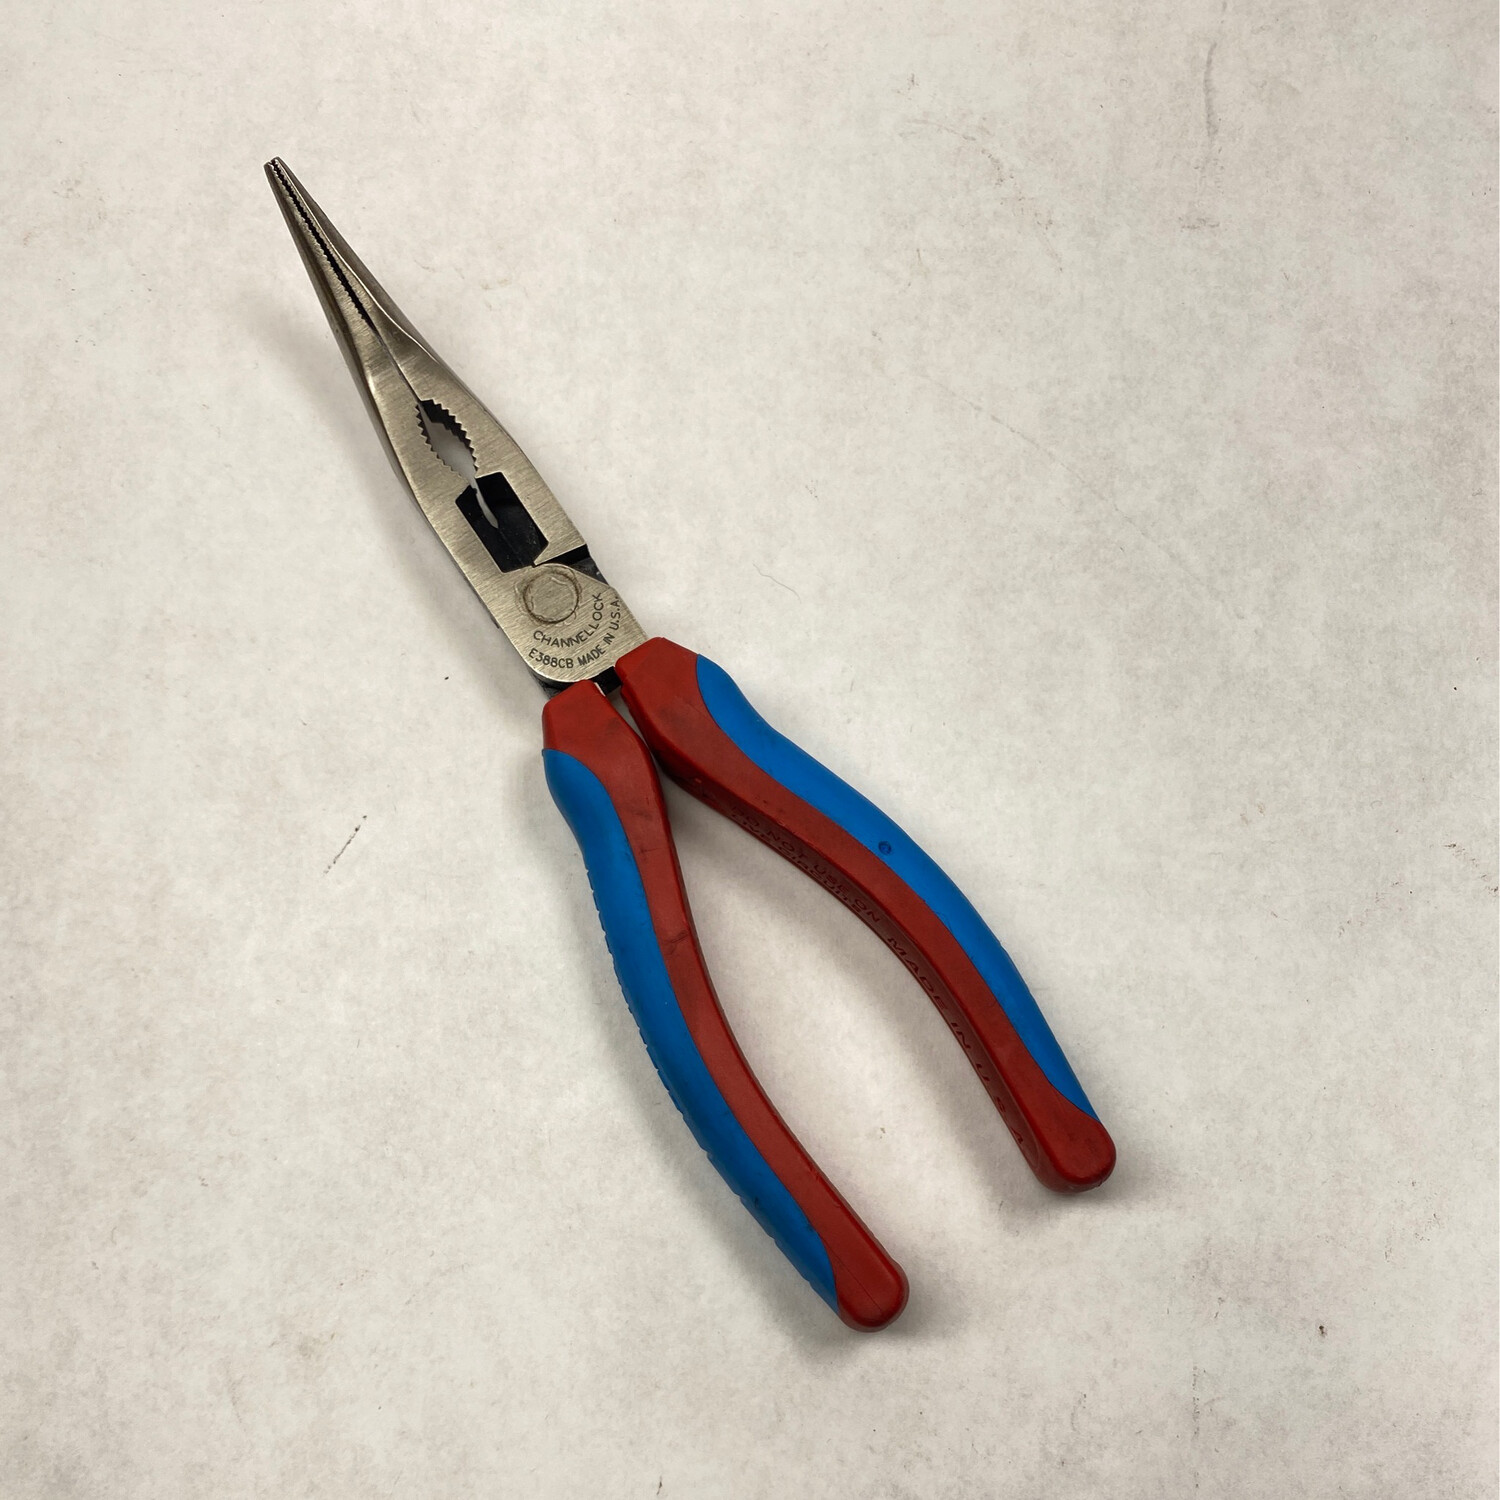 Channellock Angled Long Nose Pliers, E388CB